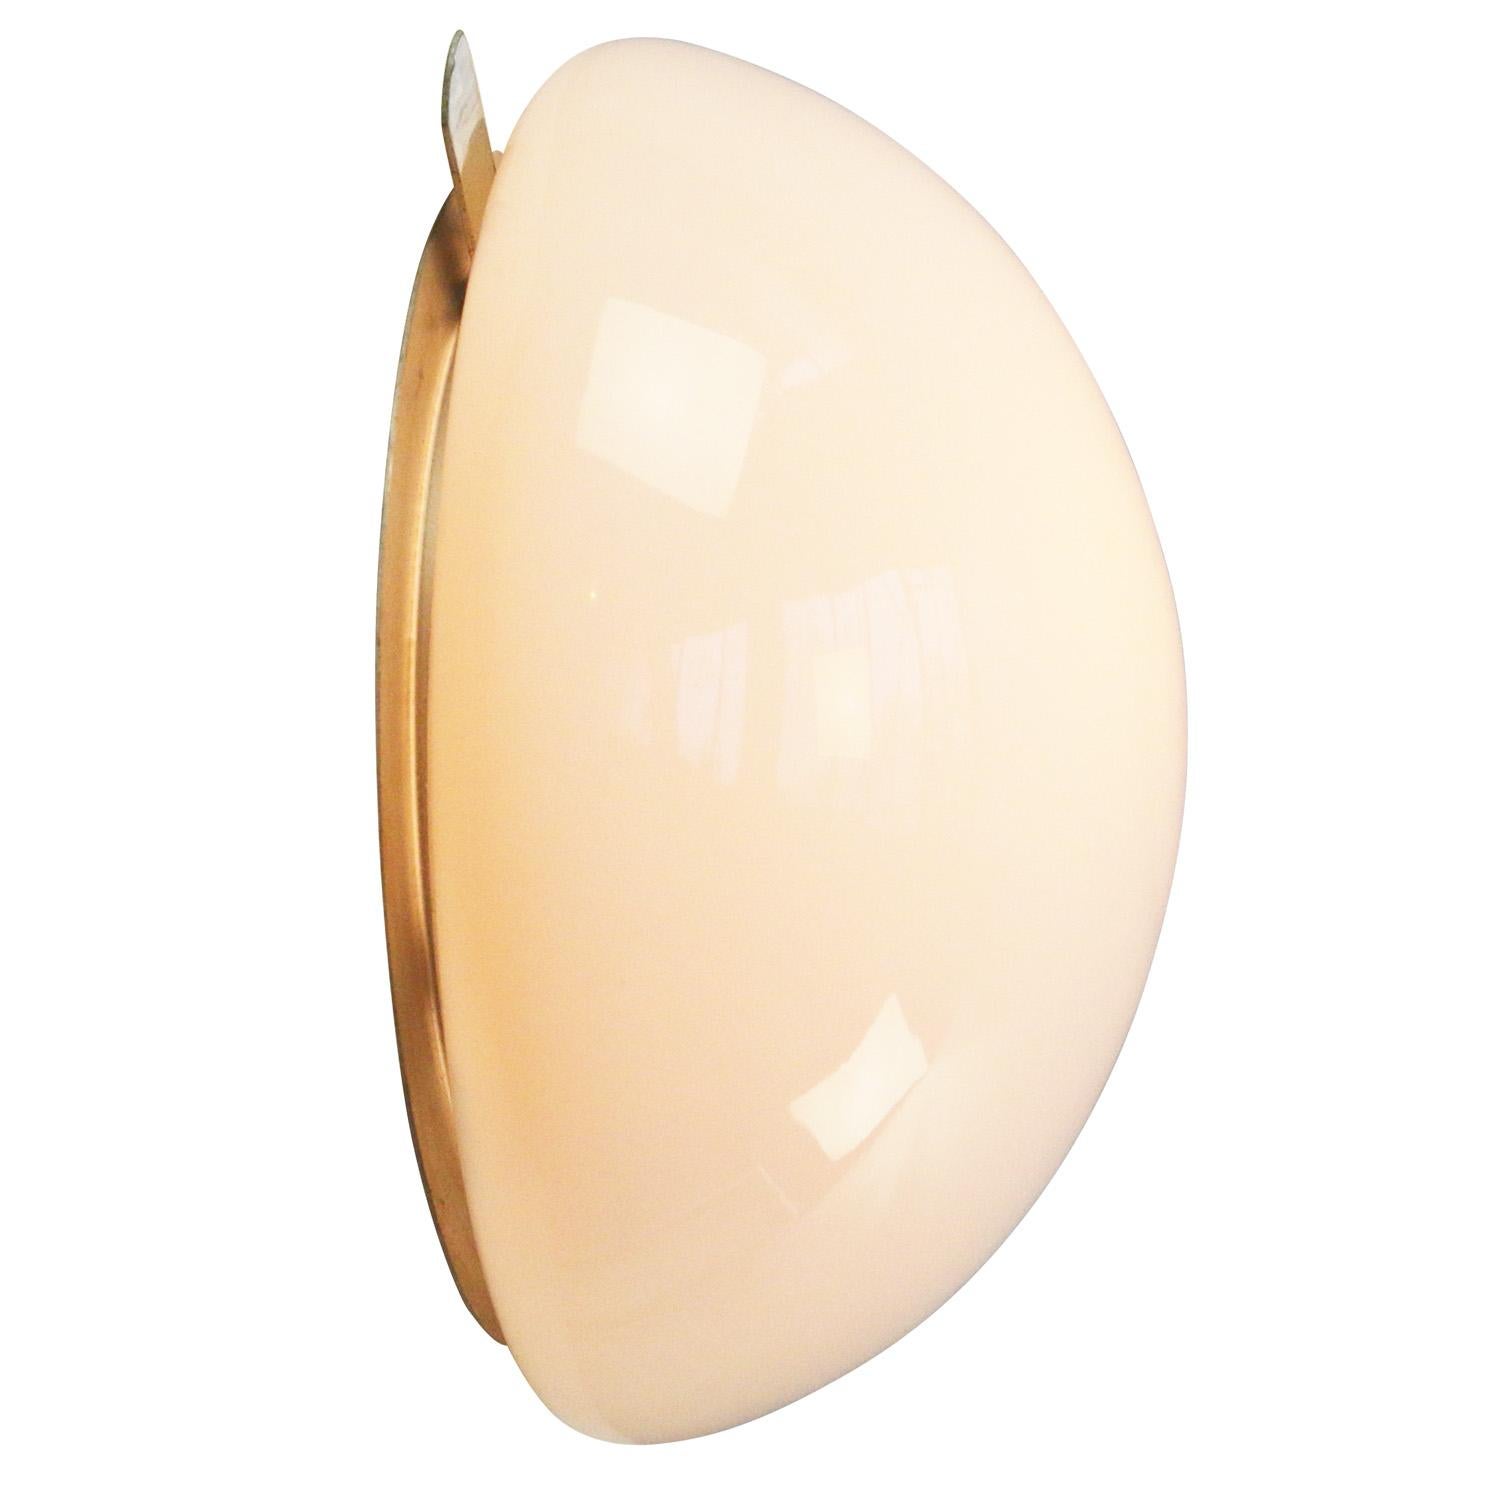 Belgian opaline industrial ceiling lamp.

Aluminum base with white opaline glass.

Weight: 0.90 kg / 2 lb.

Priced per individual item. All lamps have been made suitable by international standards for incandescent light bulbs, energy-efficient and